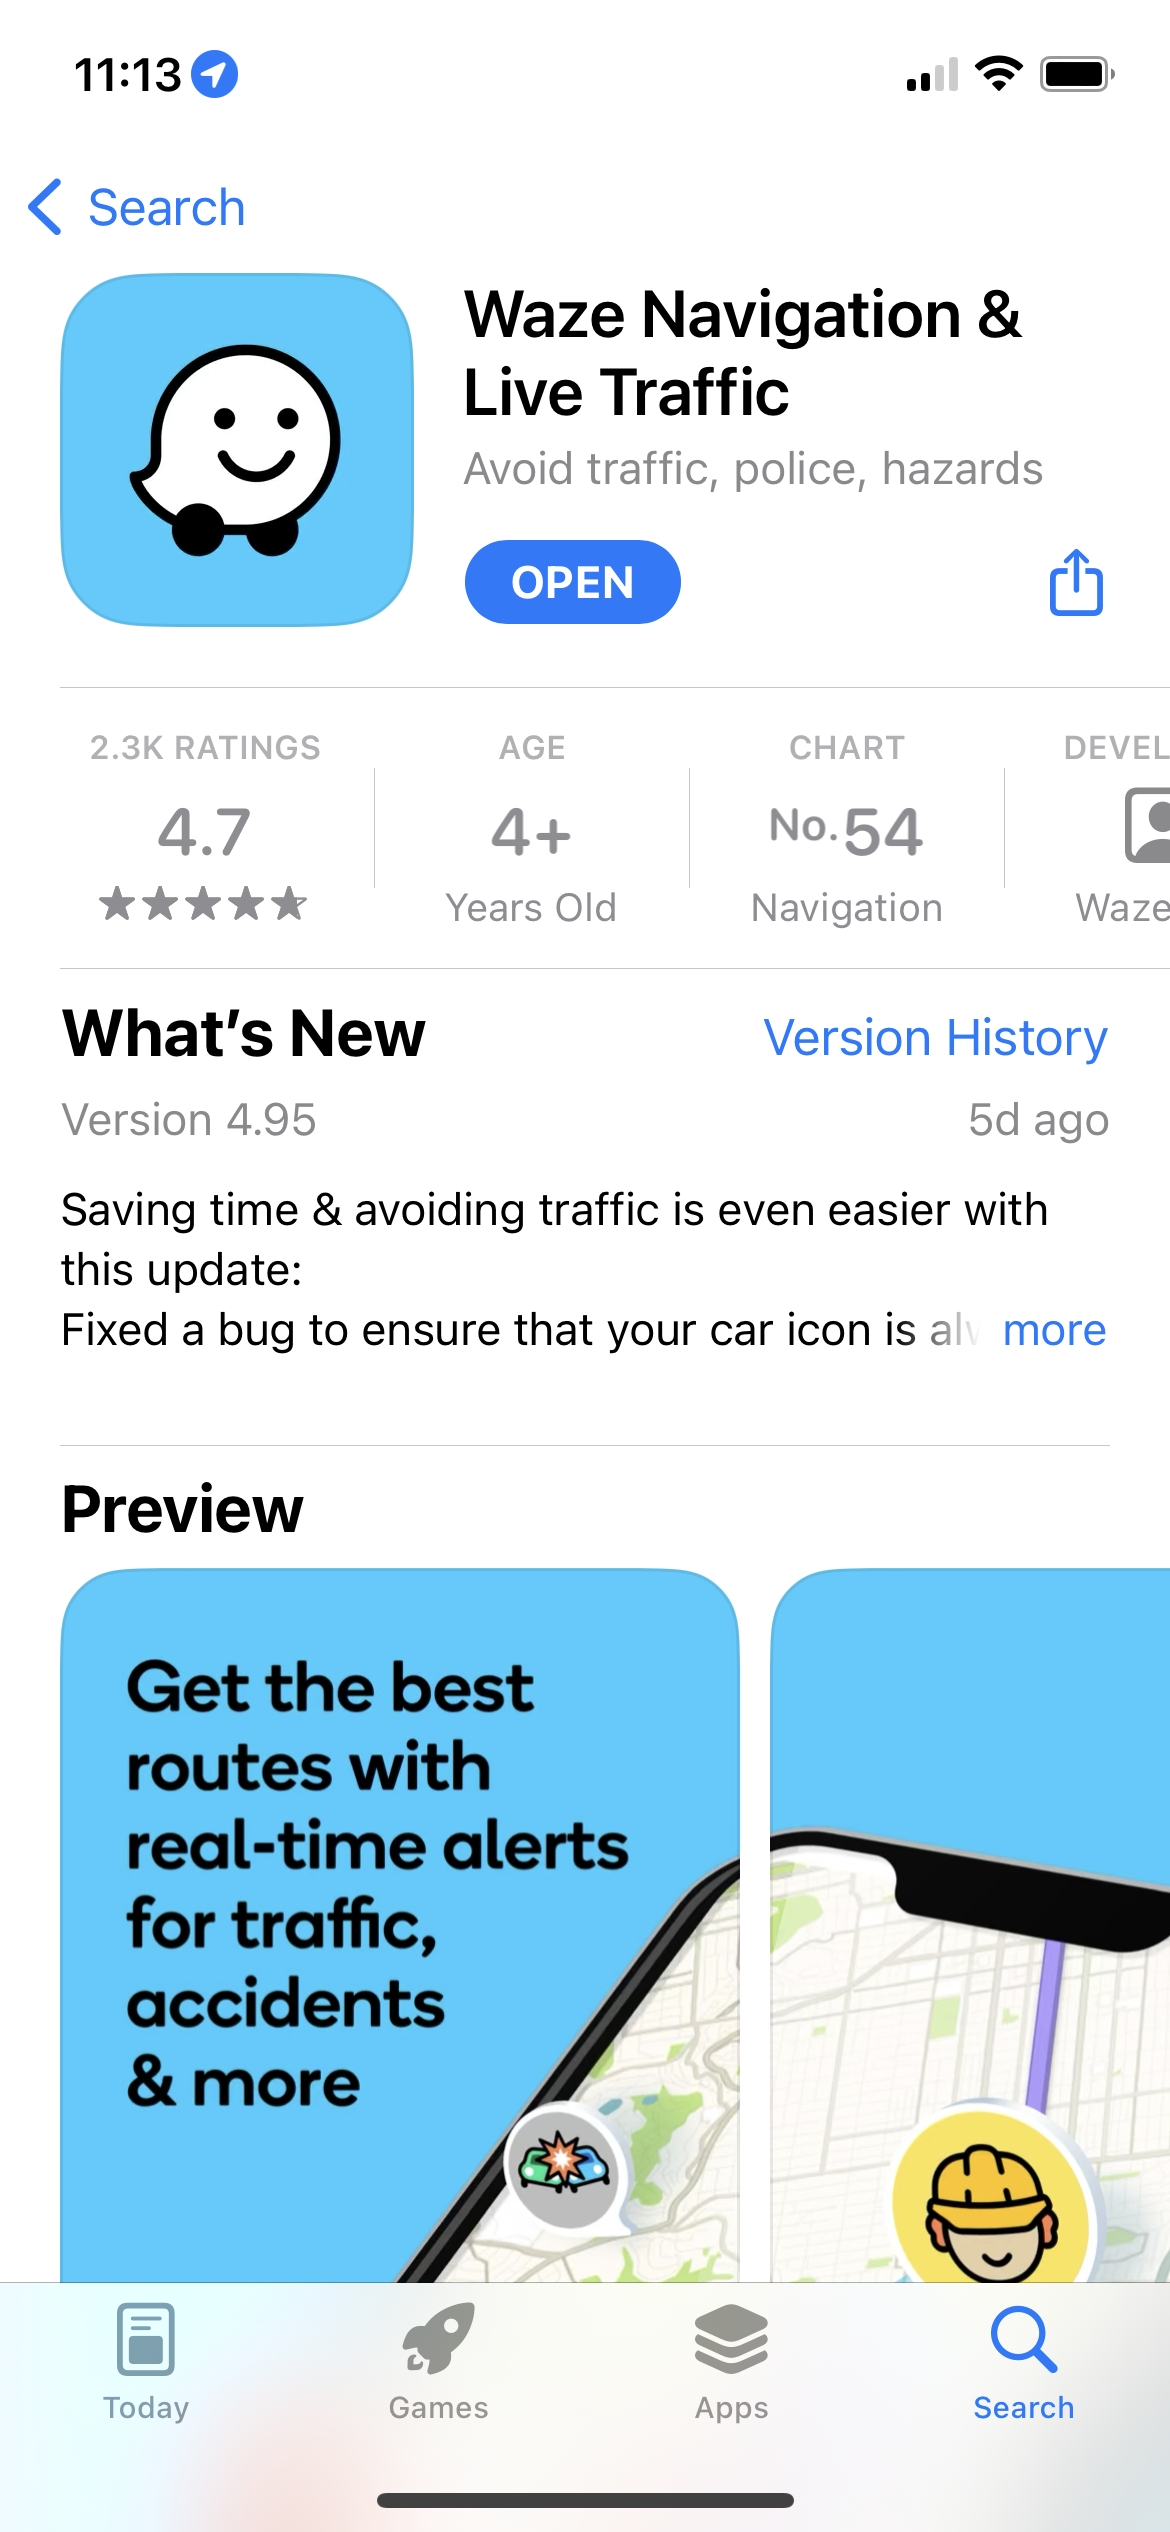 Install and open Waze